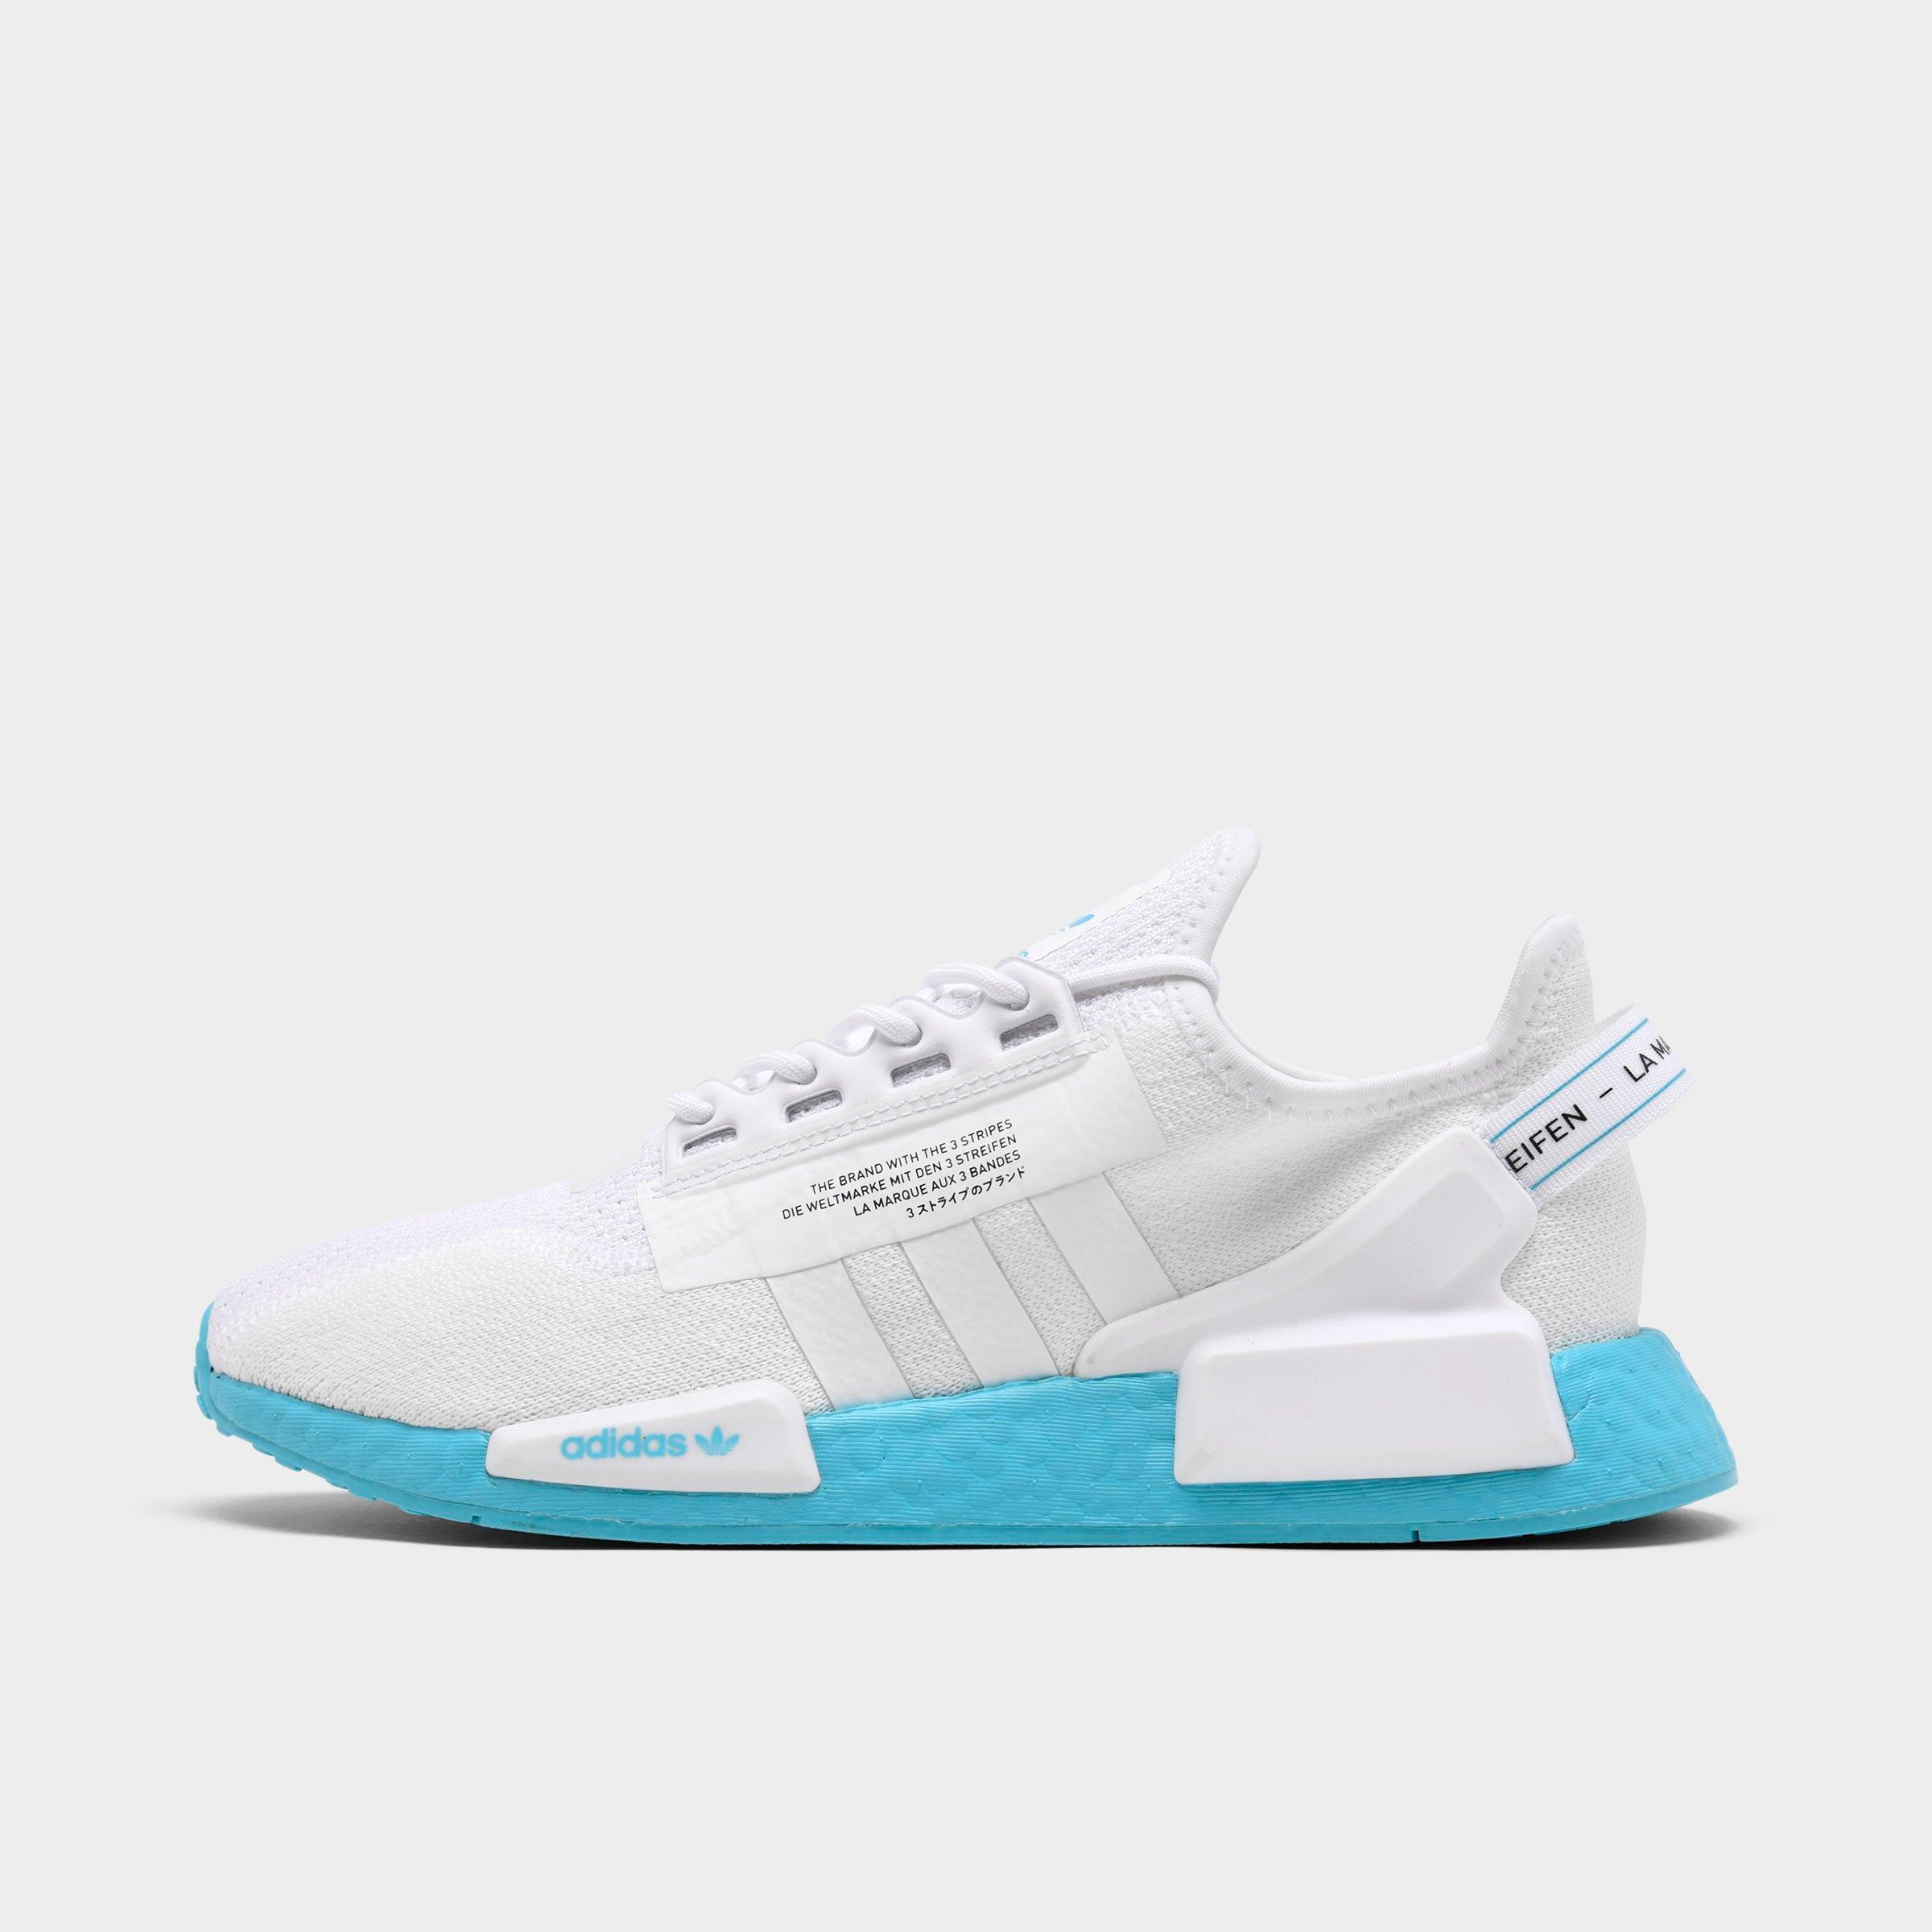 turquoise nmd